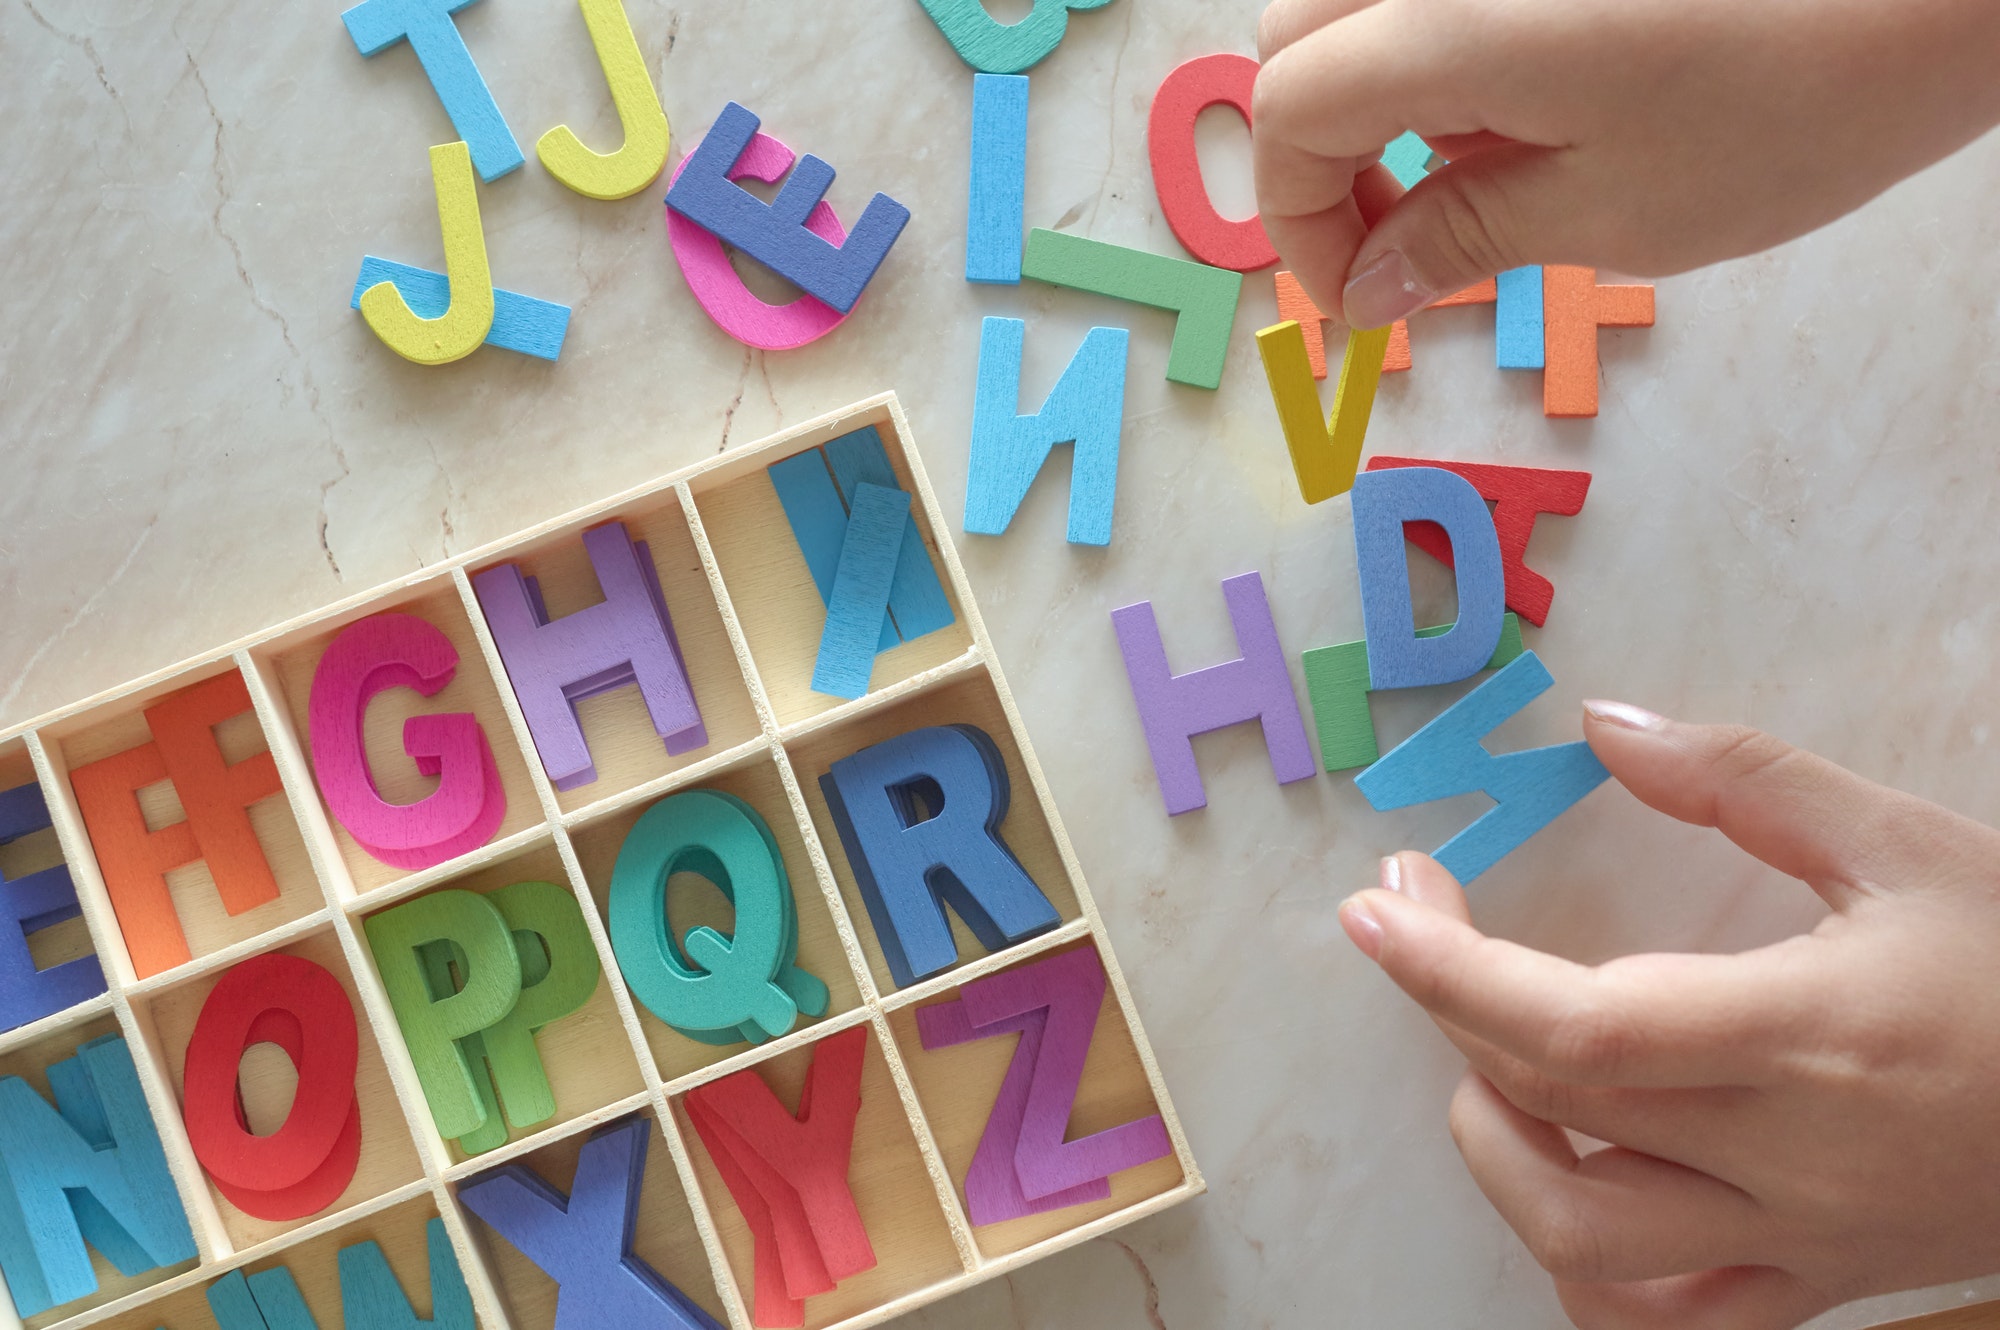 Child play the colorful wooden alphabet toy